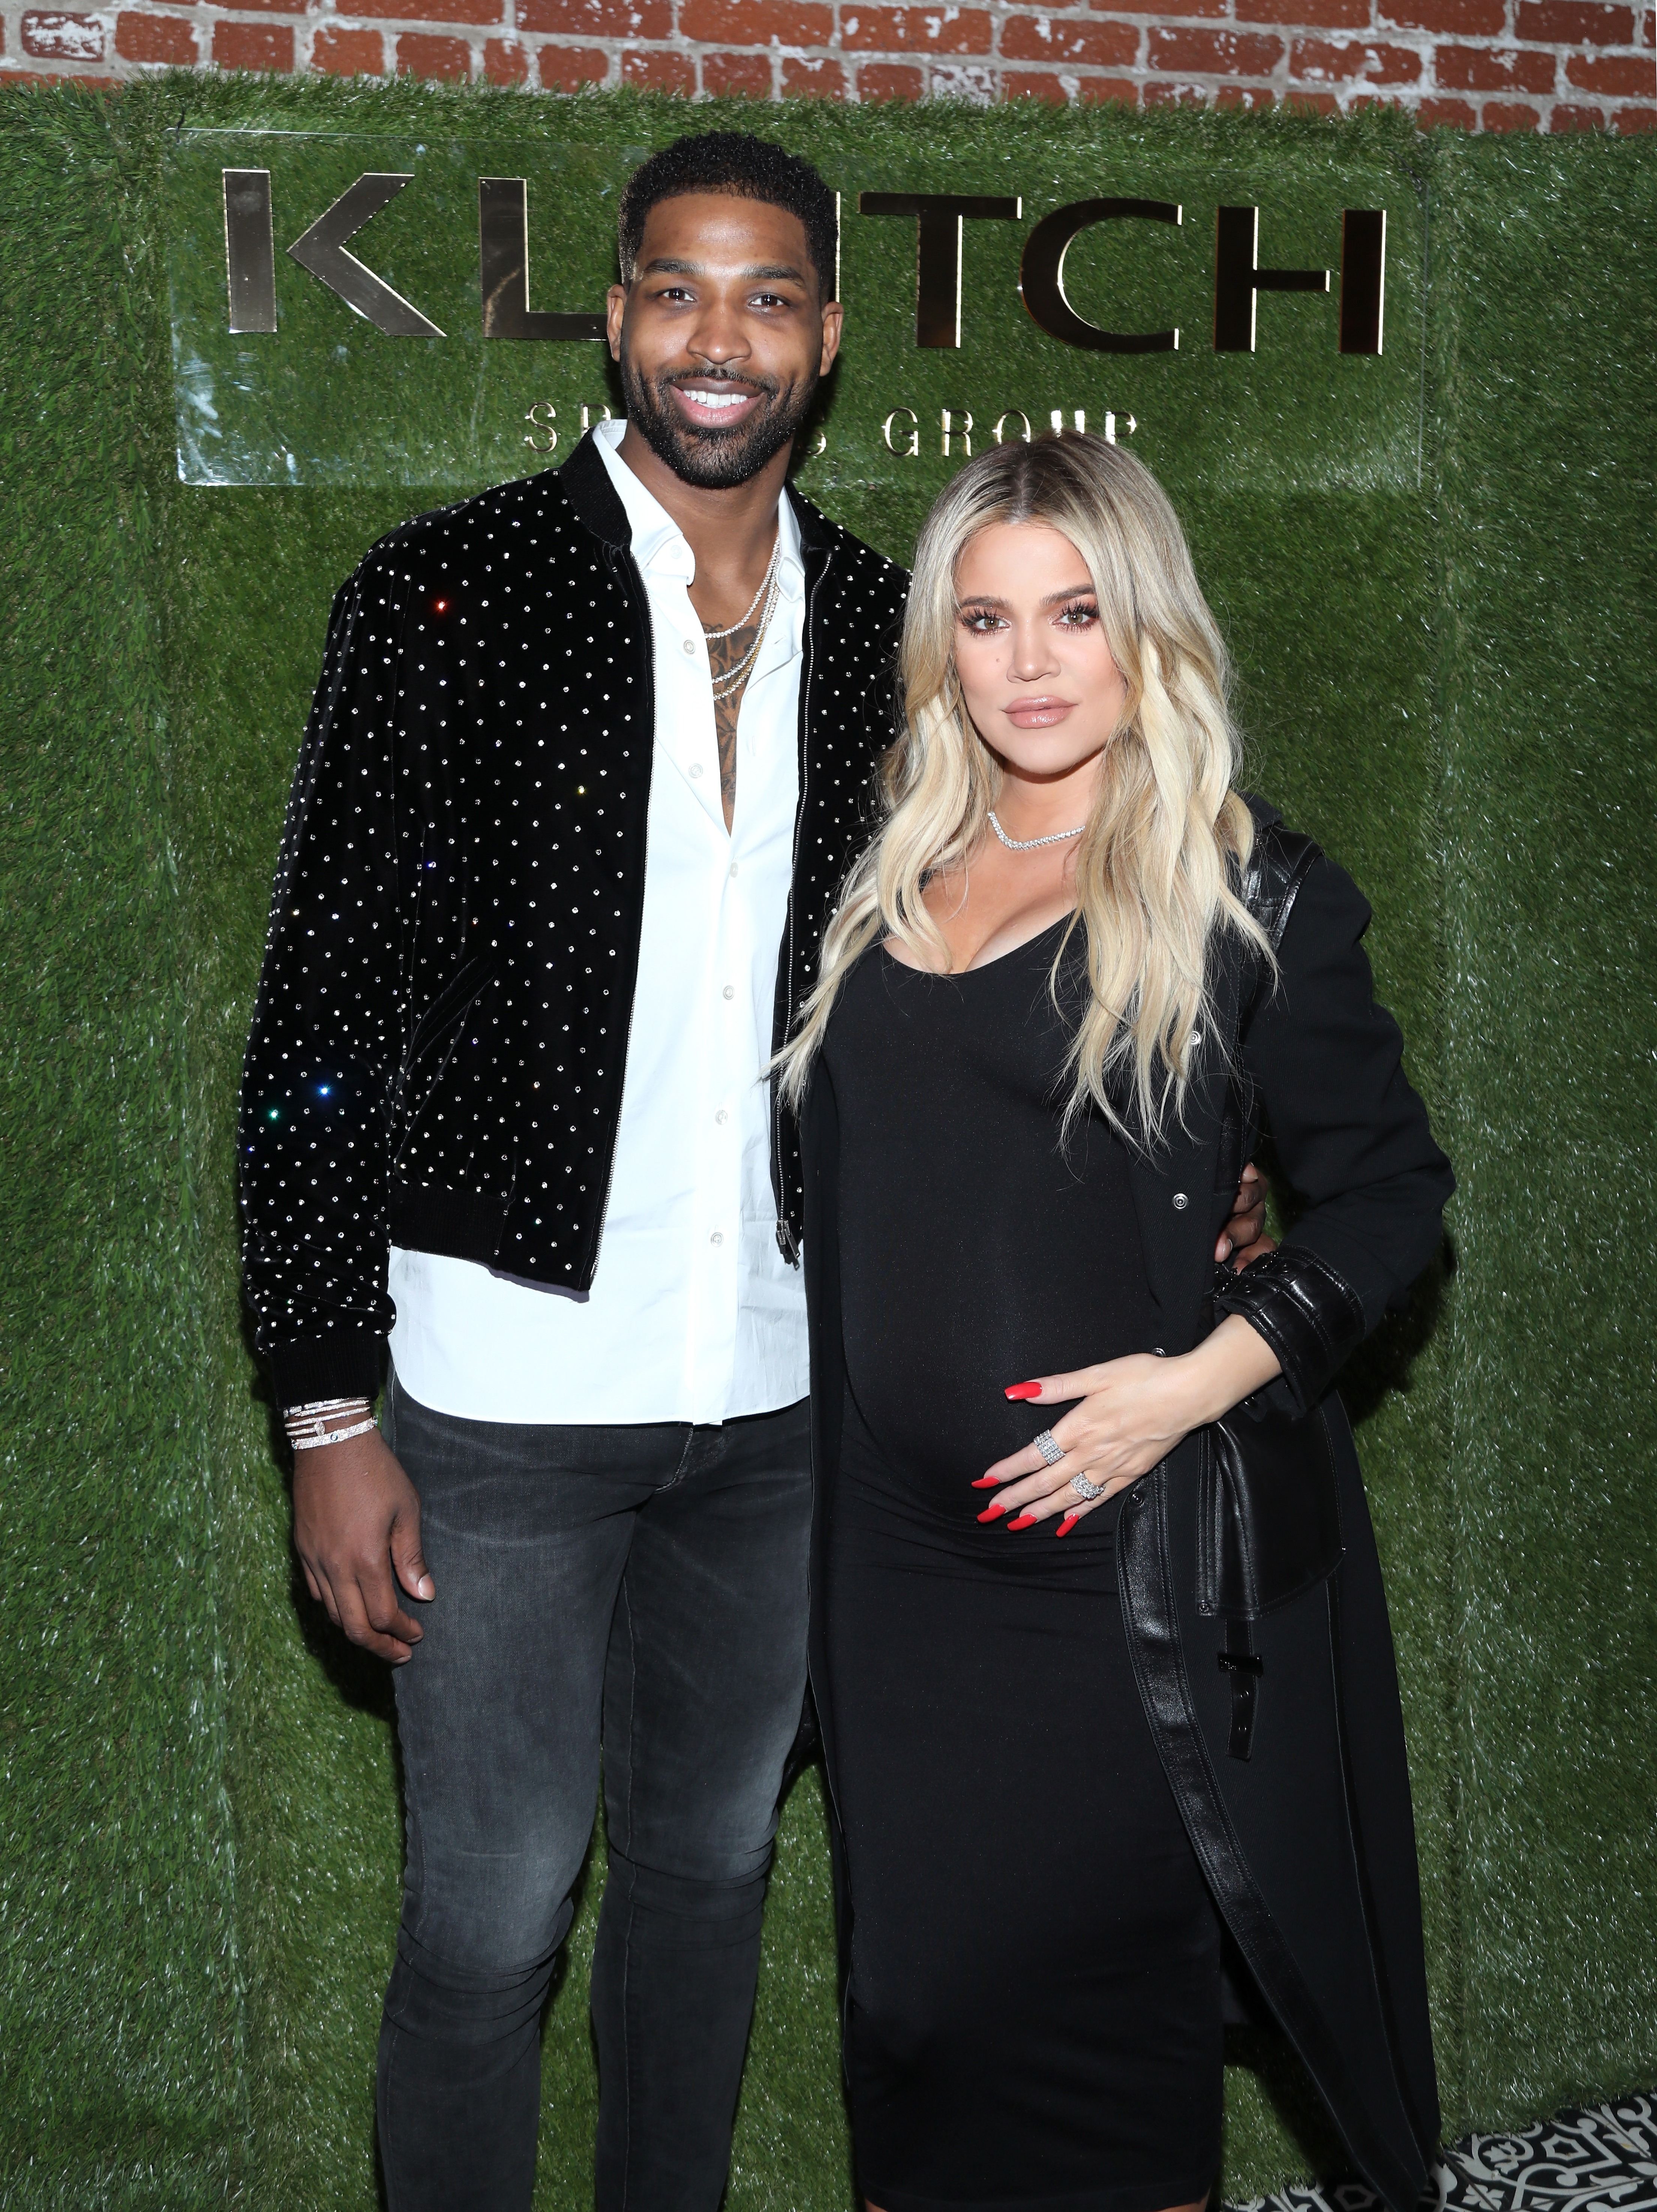 Khloe may be thinking of adding to her family with baby daddy Tristan Thompson